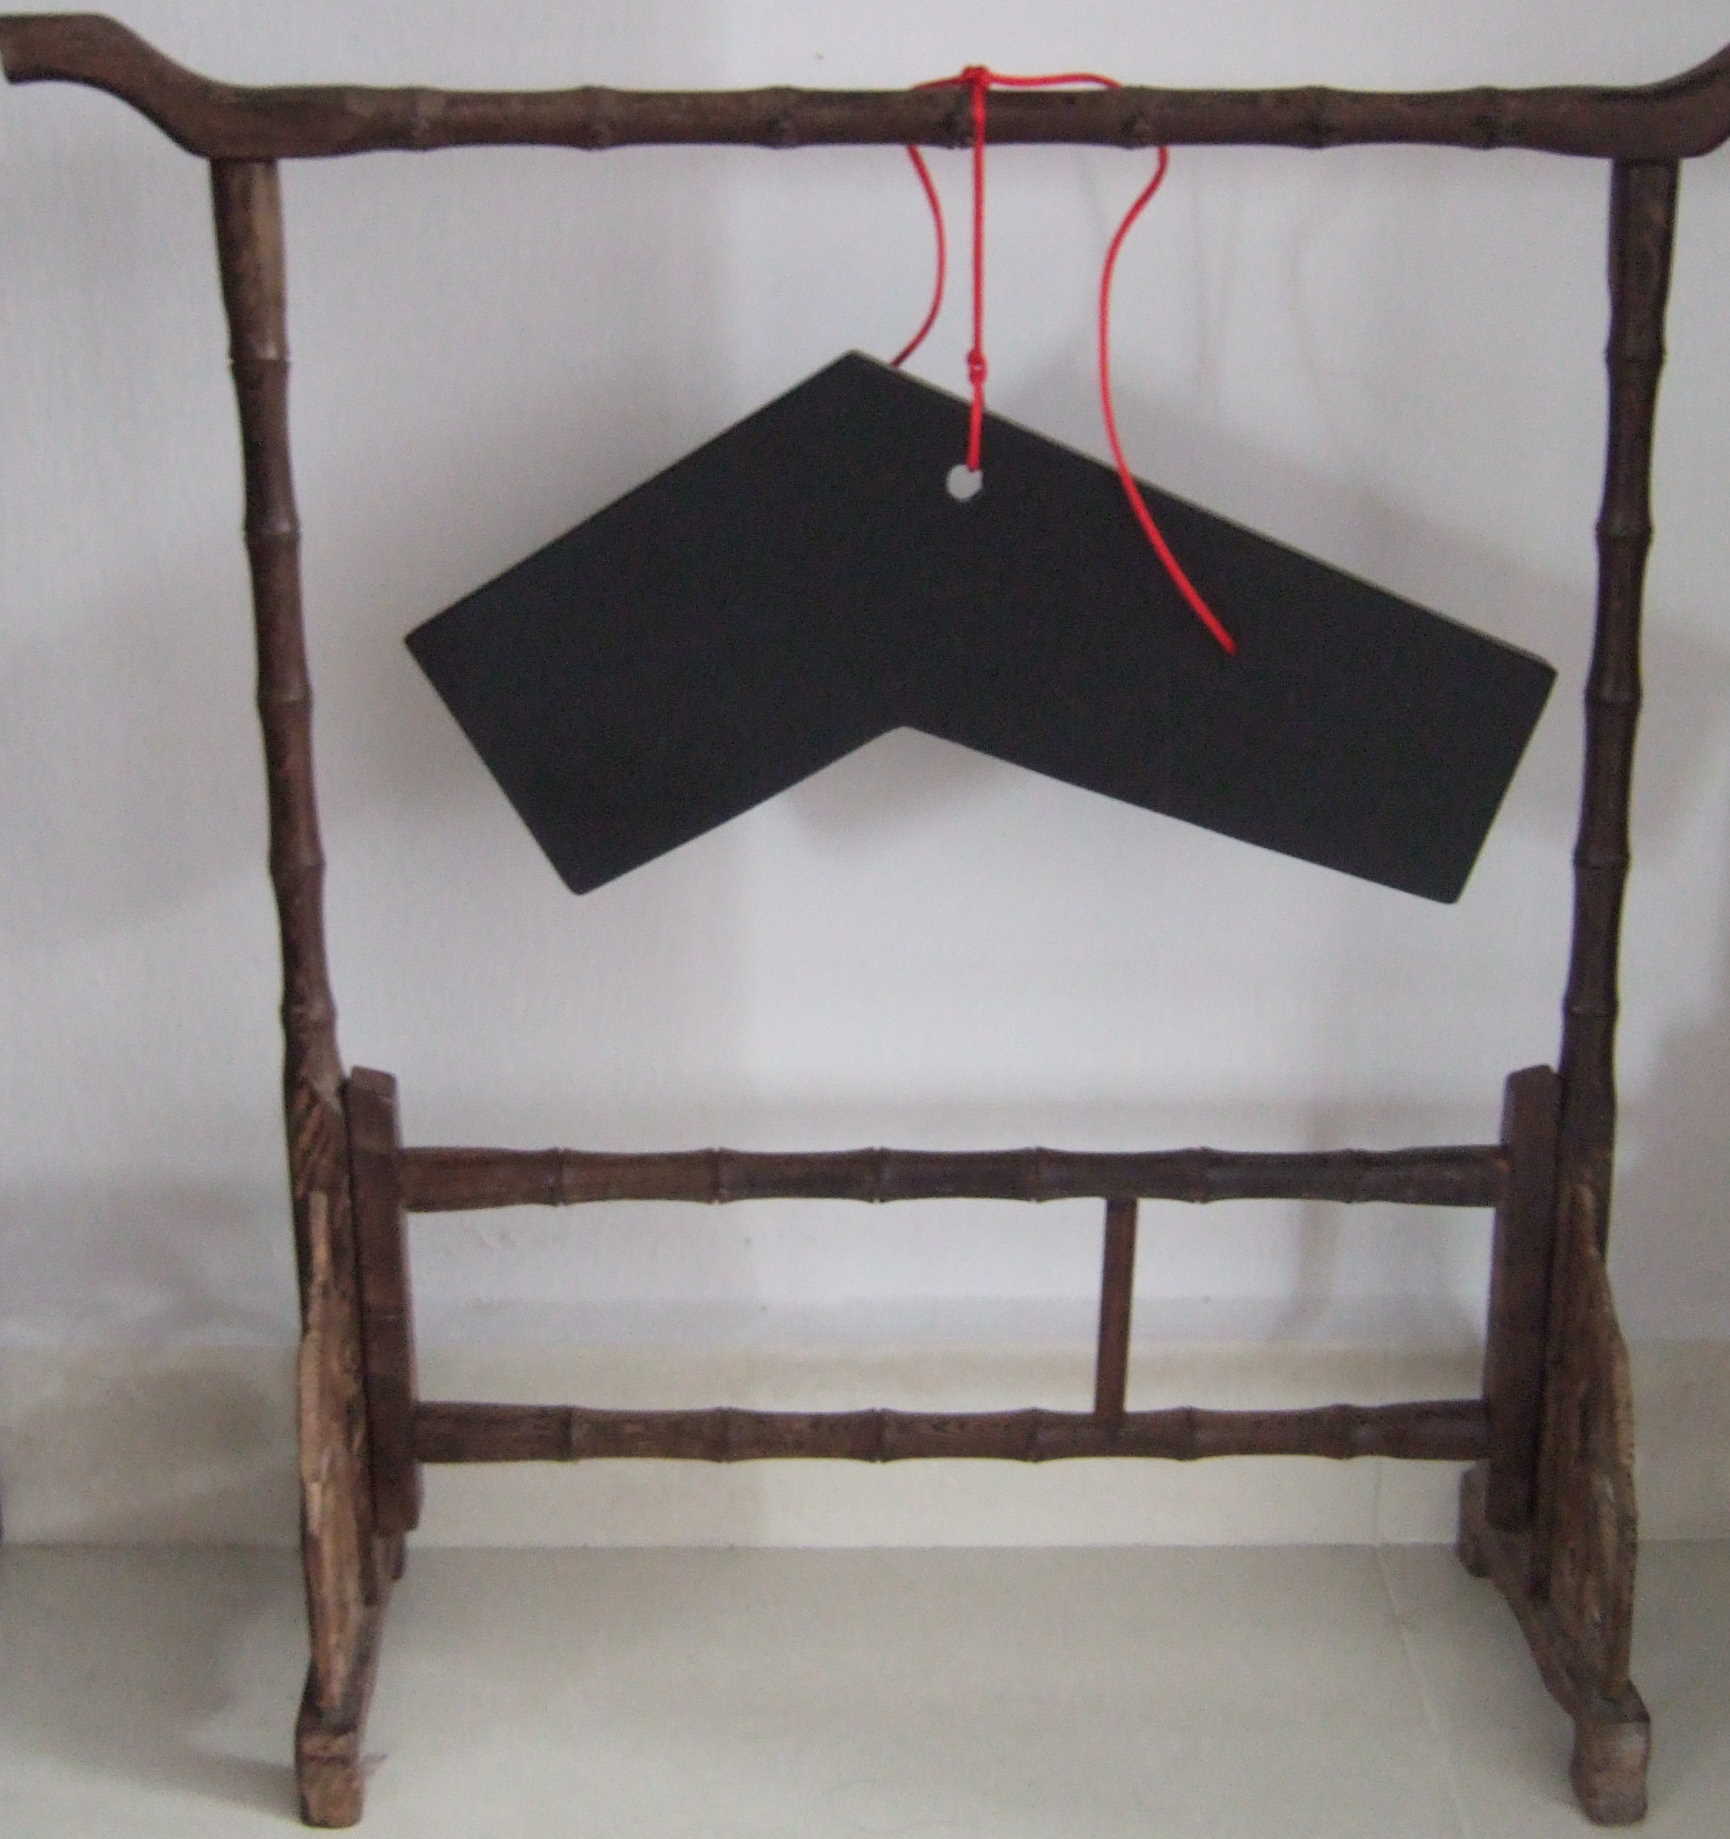 bianstone chime musical stone with hanger